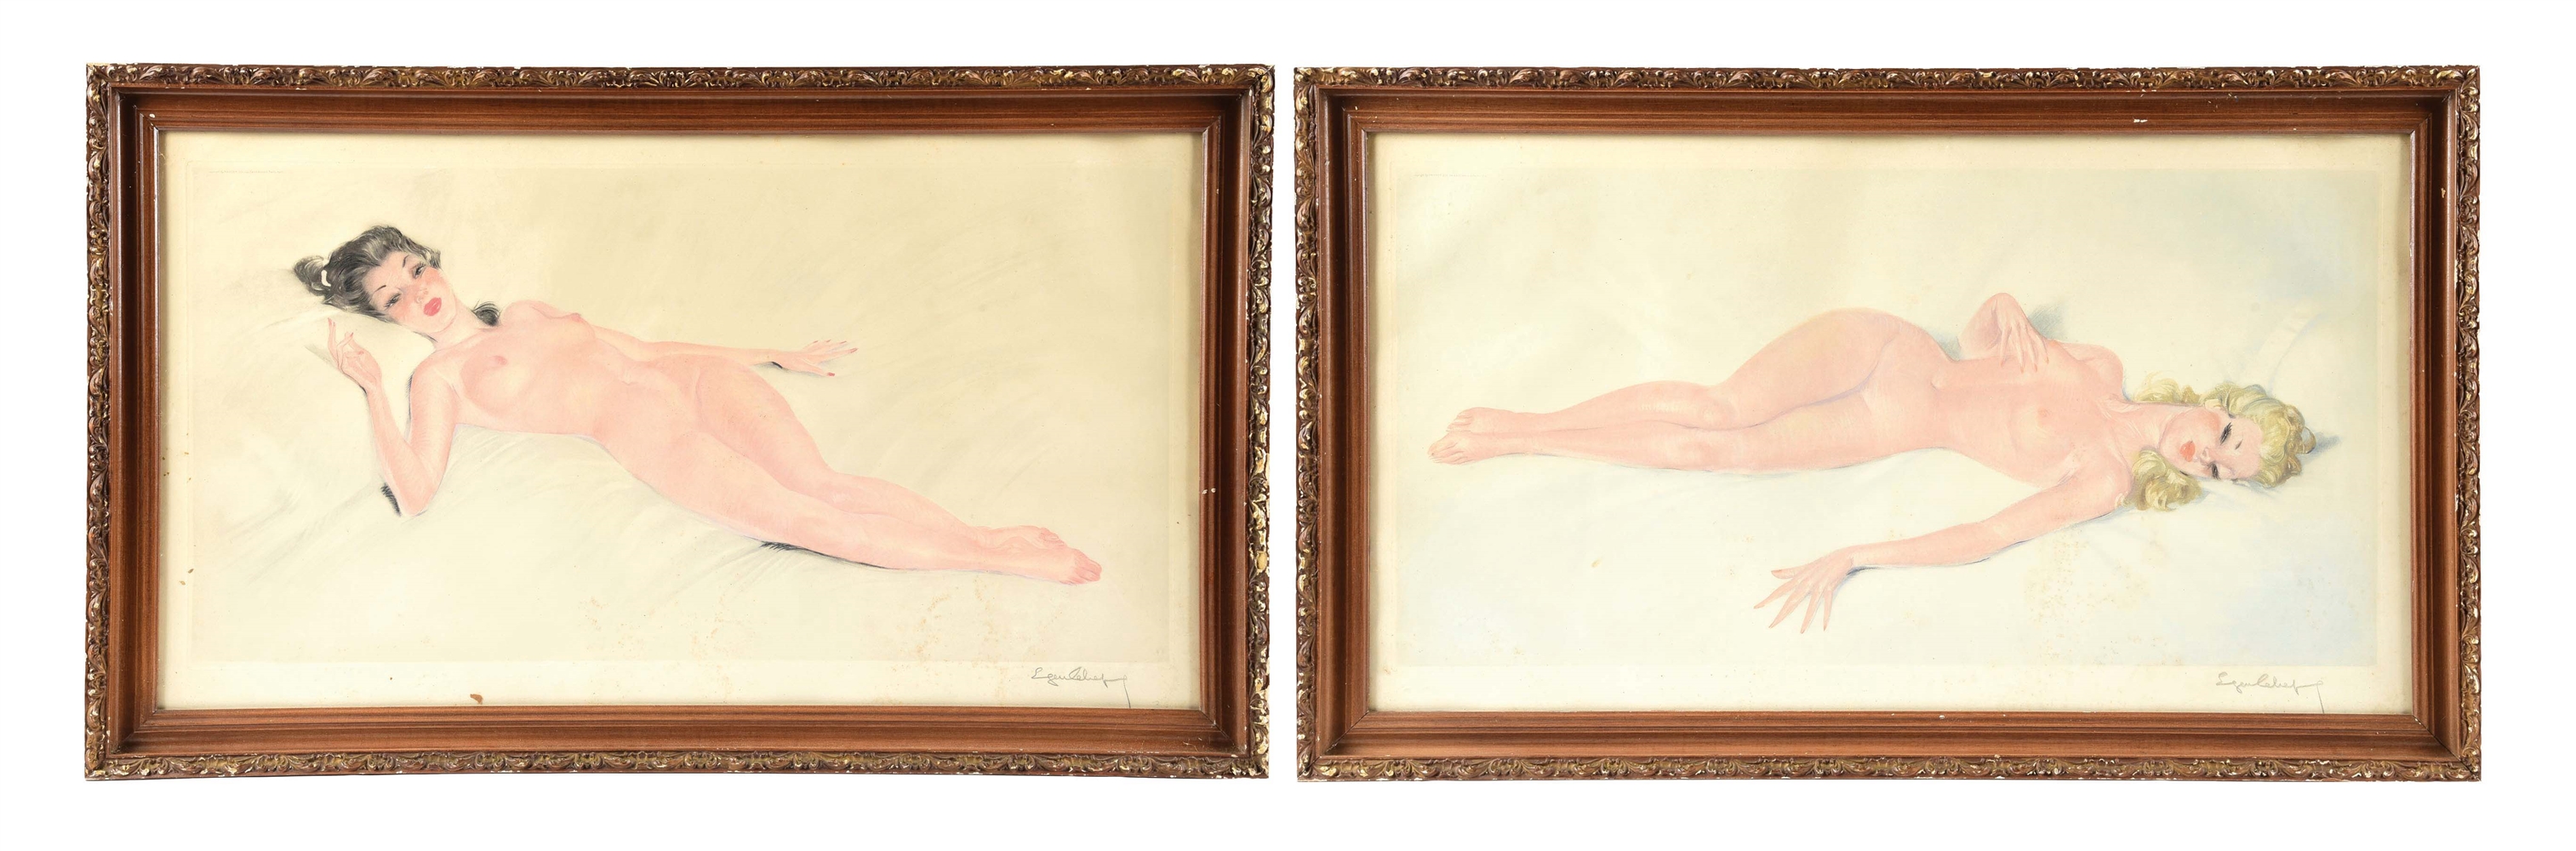 PAIR OF EUGENE LELIEPVRE (FRENCH, 1908 - 2013) PIN-UP BEAUTIES SIGNED IN PENCIL FRAMED LITHOGRAPHS.